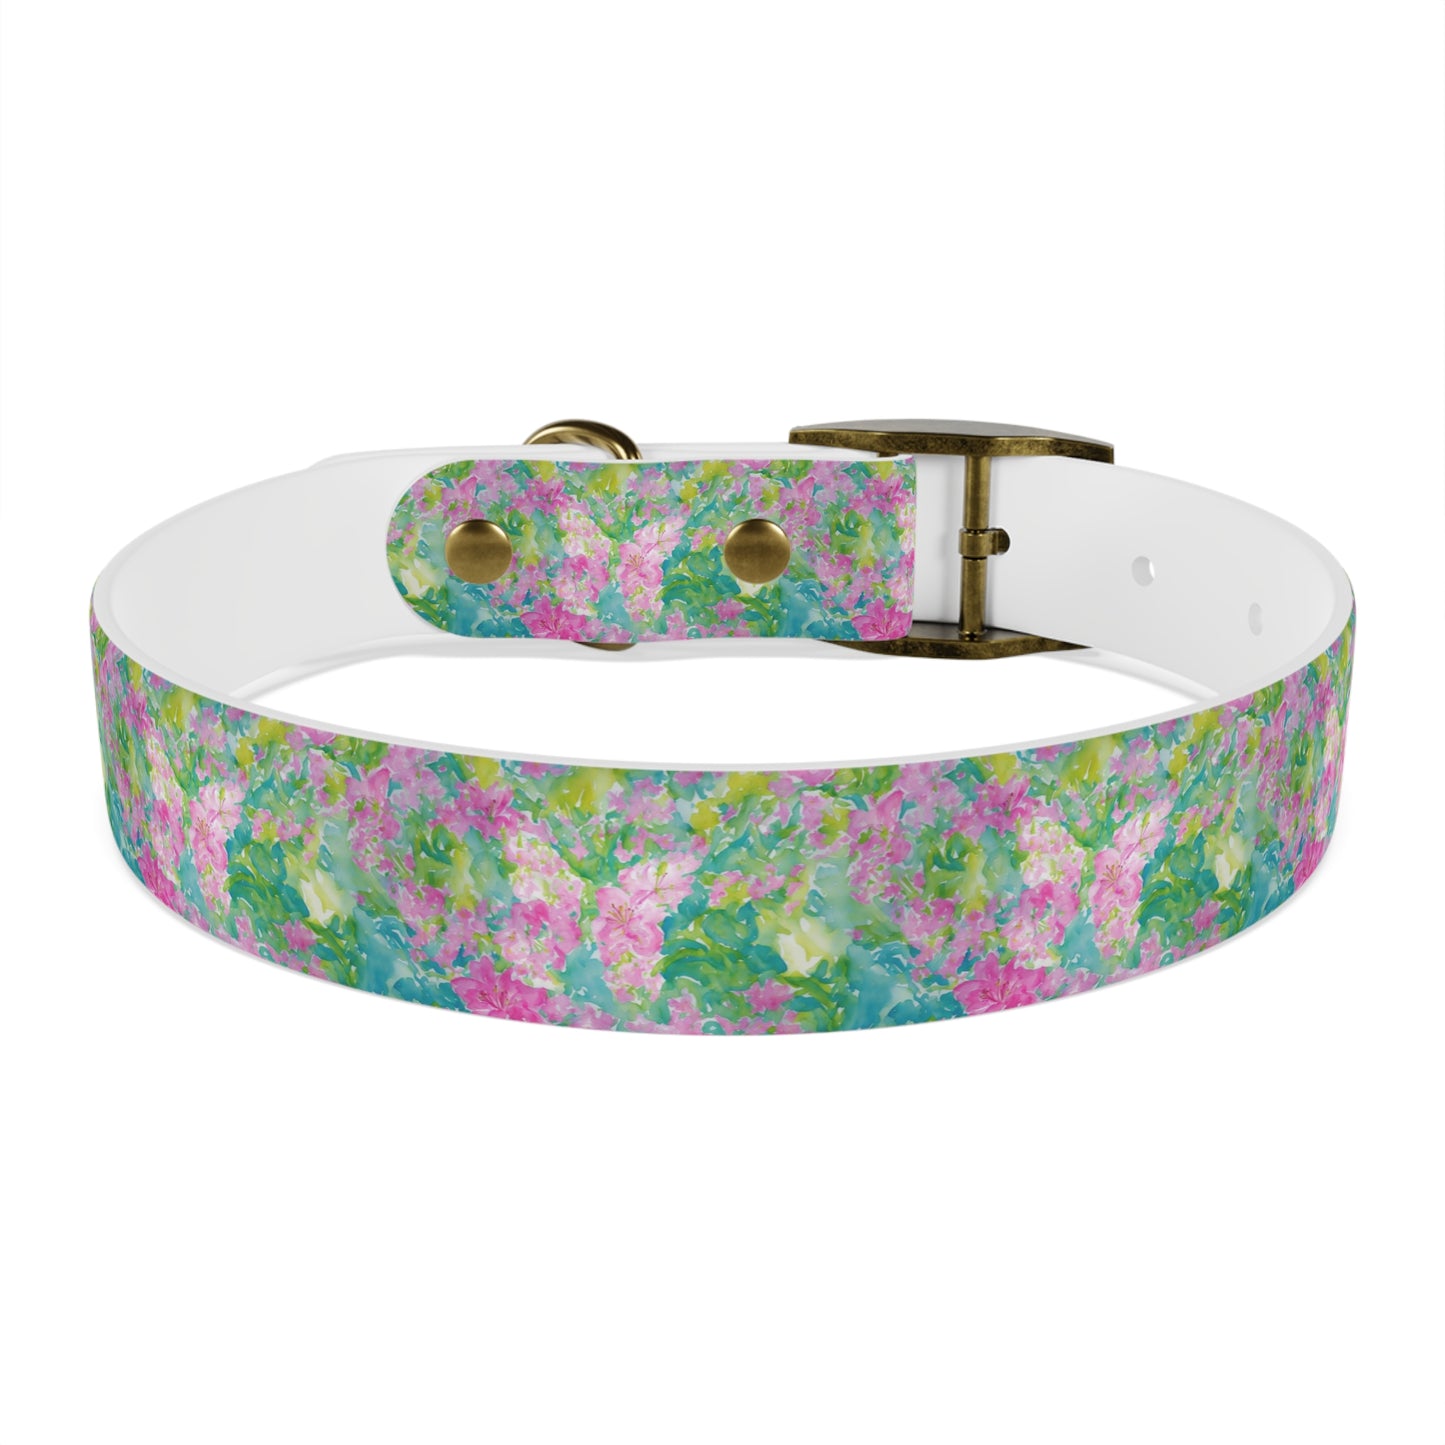 Bright Blooming Flowers & Butterflies Watercolor Pattern Dog Collar